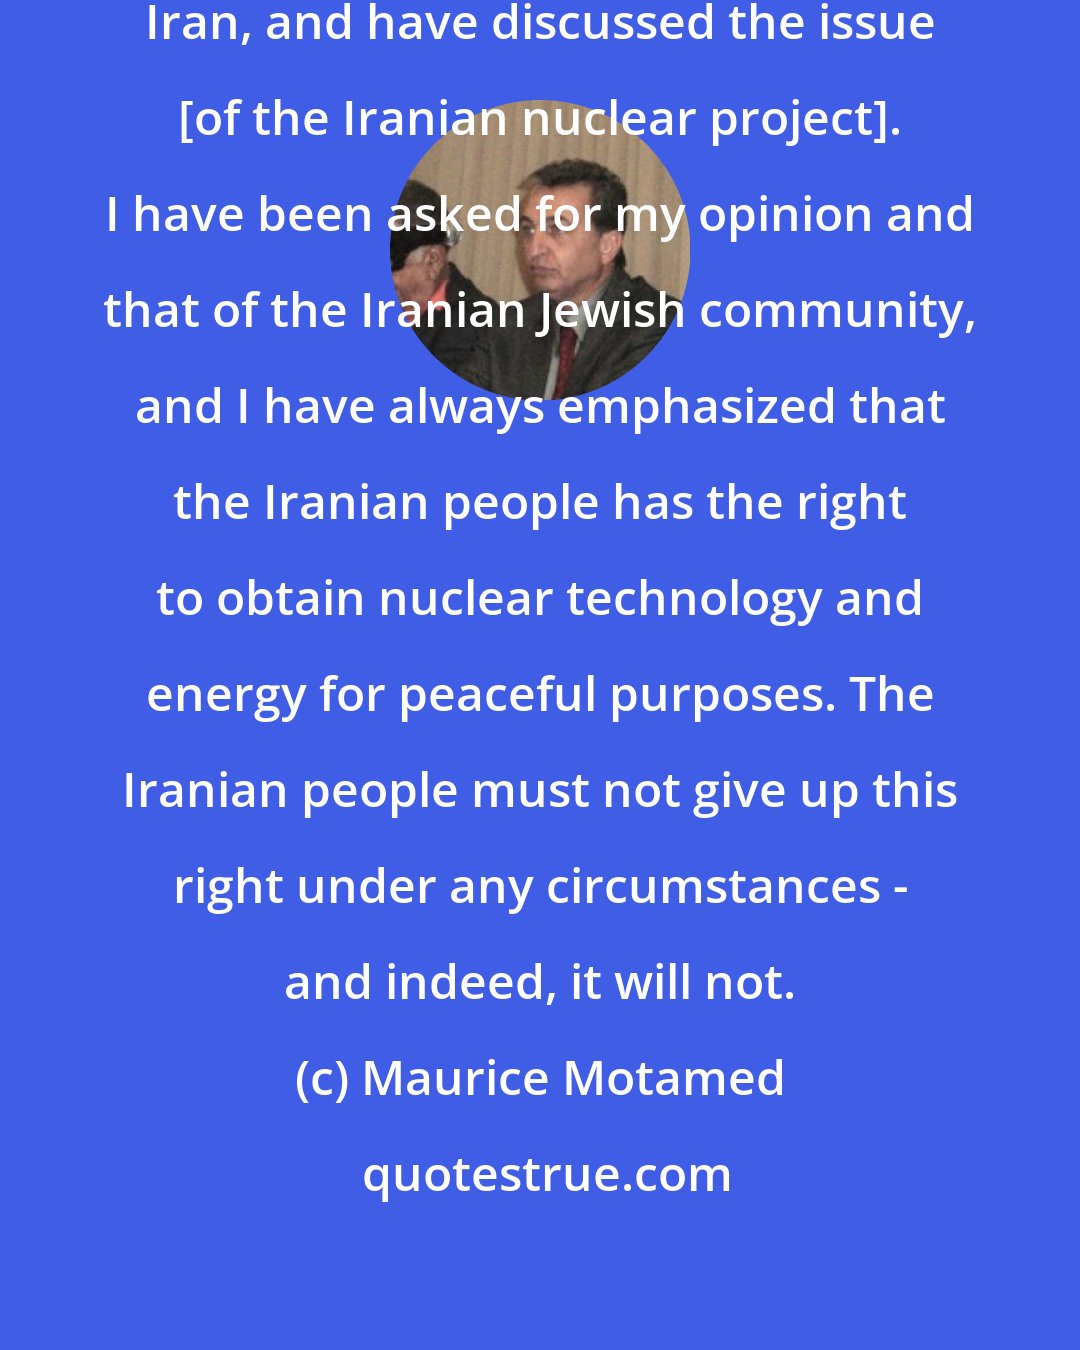 Maurice Motamed: I have traveled many times outside Iran, and have discussed the issue [of the Iranian nuclear project]. I have been asked for my opinion and that of the Iranian Jewish community, and I have always emphasized that the Iranian people has the right to obtain nuclear technology and energy for peaceful purposes. The Iranian people must not give up this right under any circumstances - and indeed, it will not.